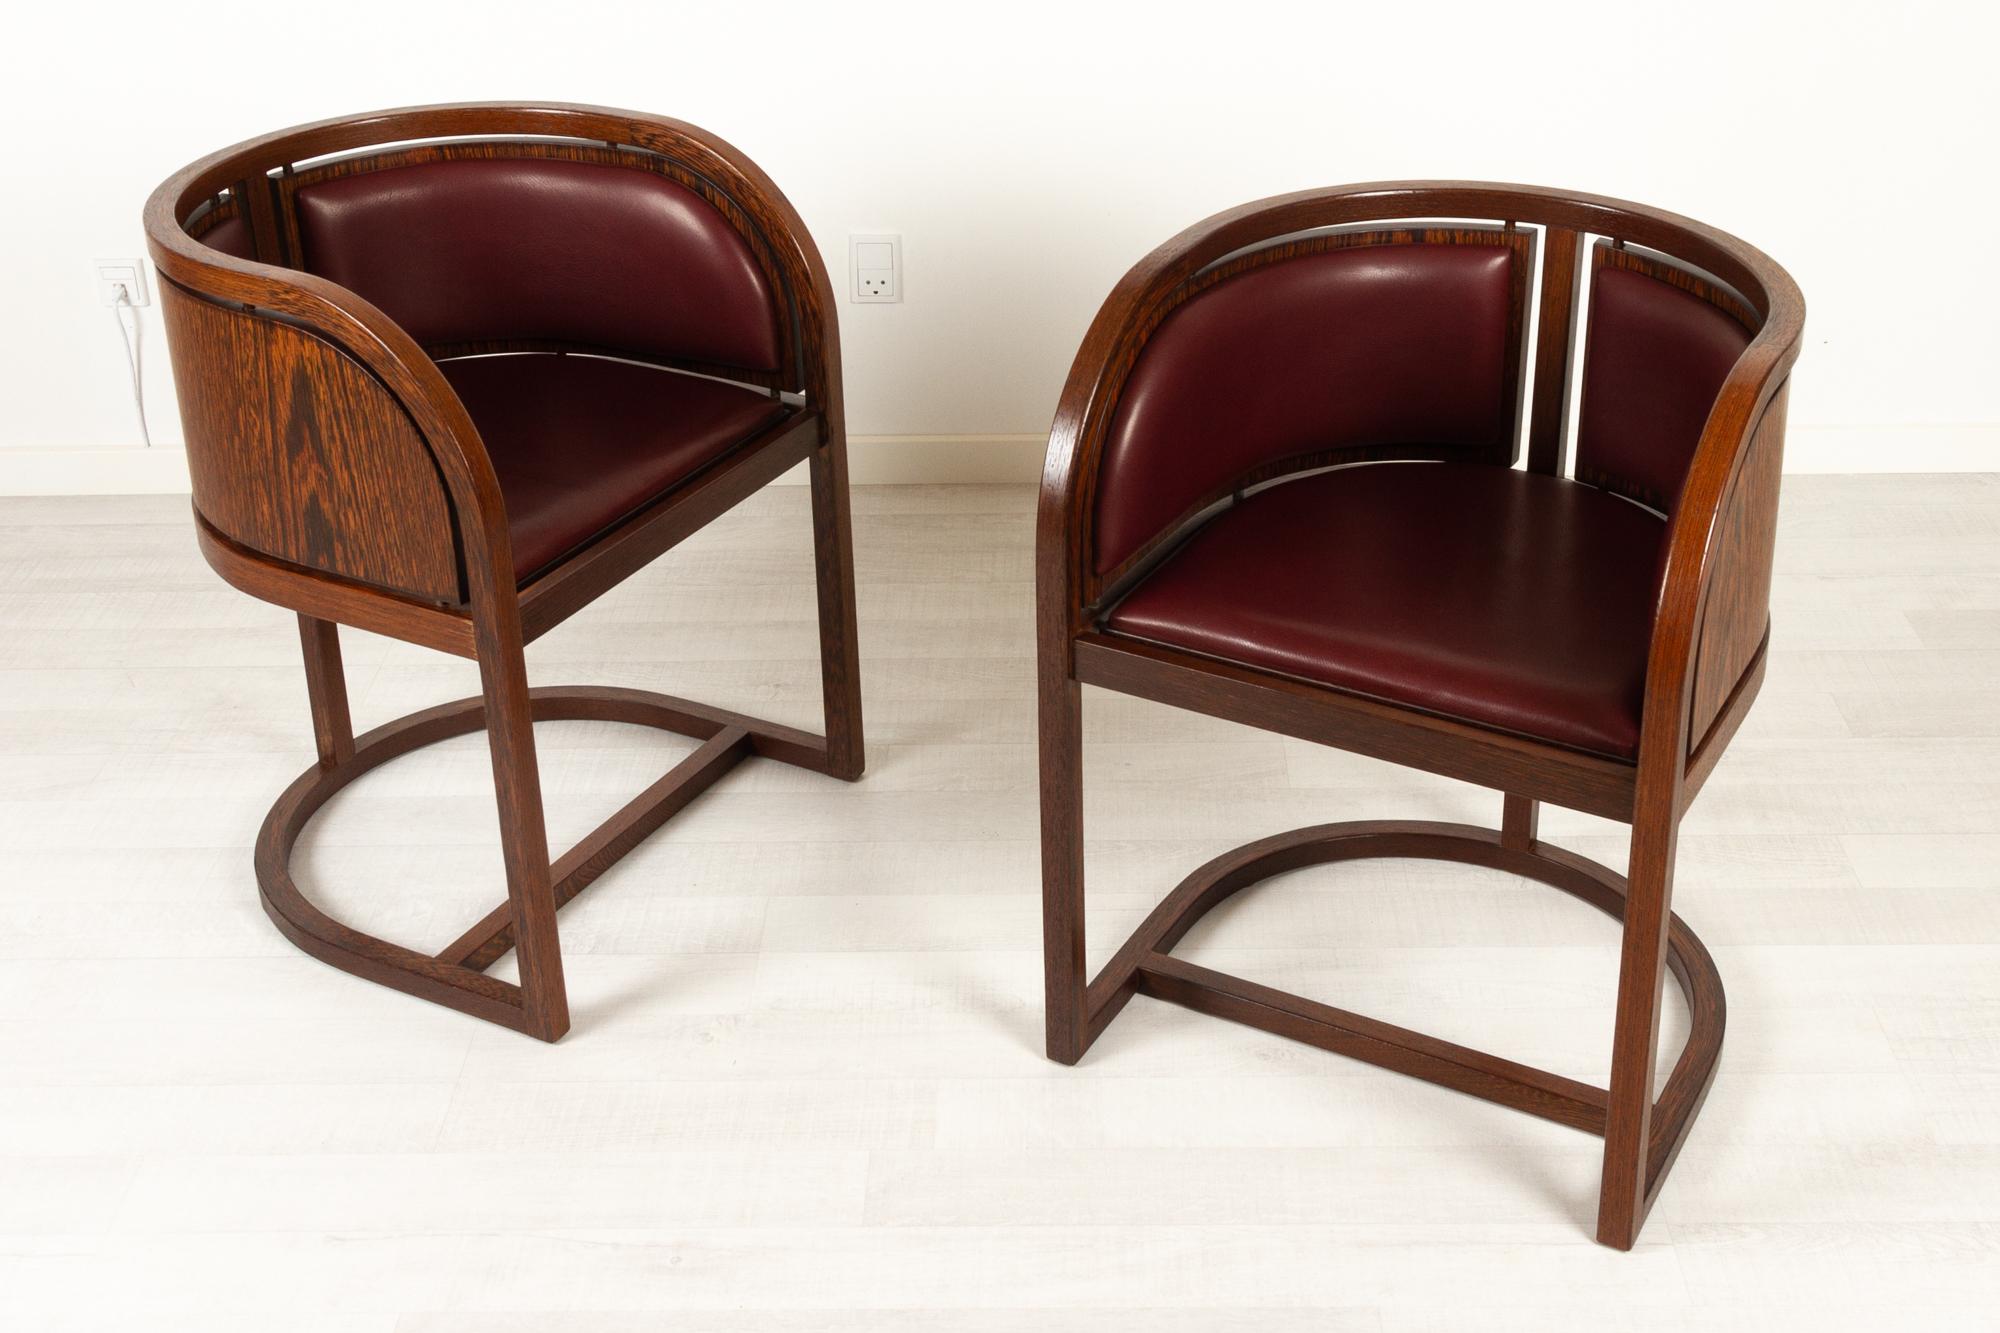 Late 20th Century Pair of Danish Wengé Armchairs by Thorup & Bonderup, 1970s